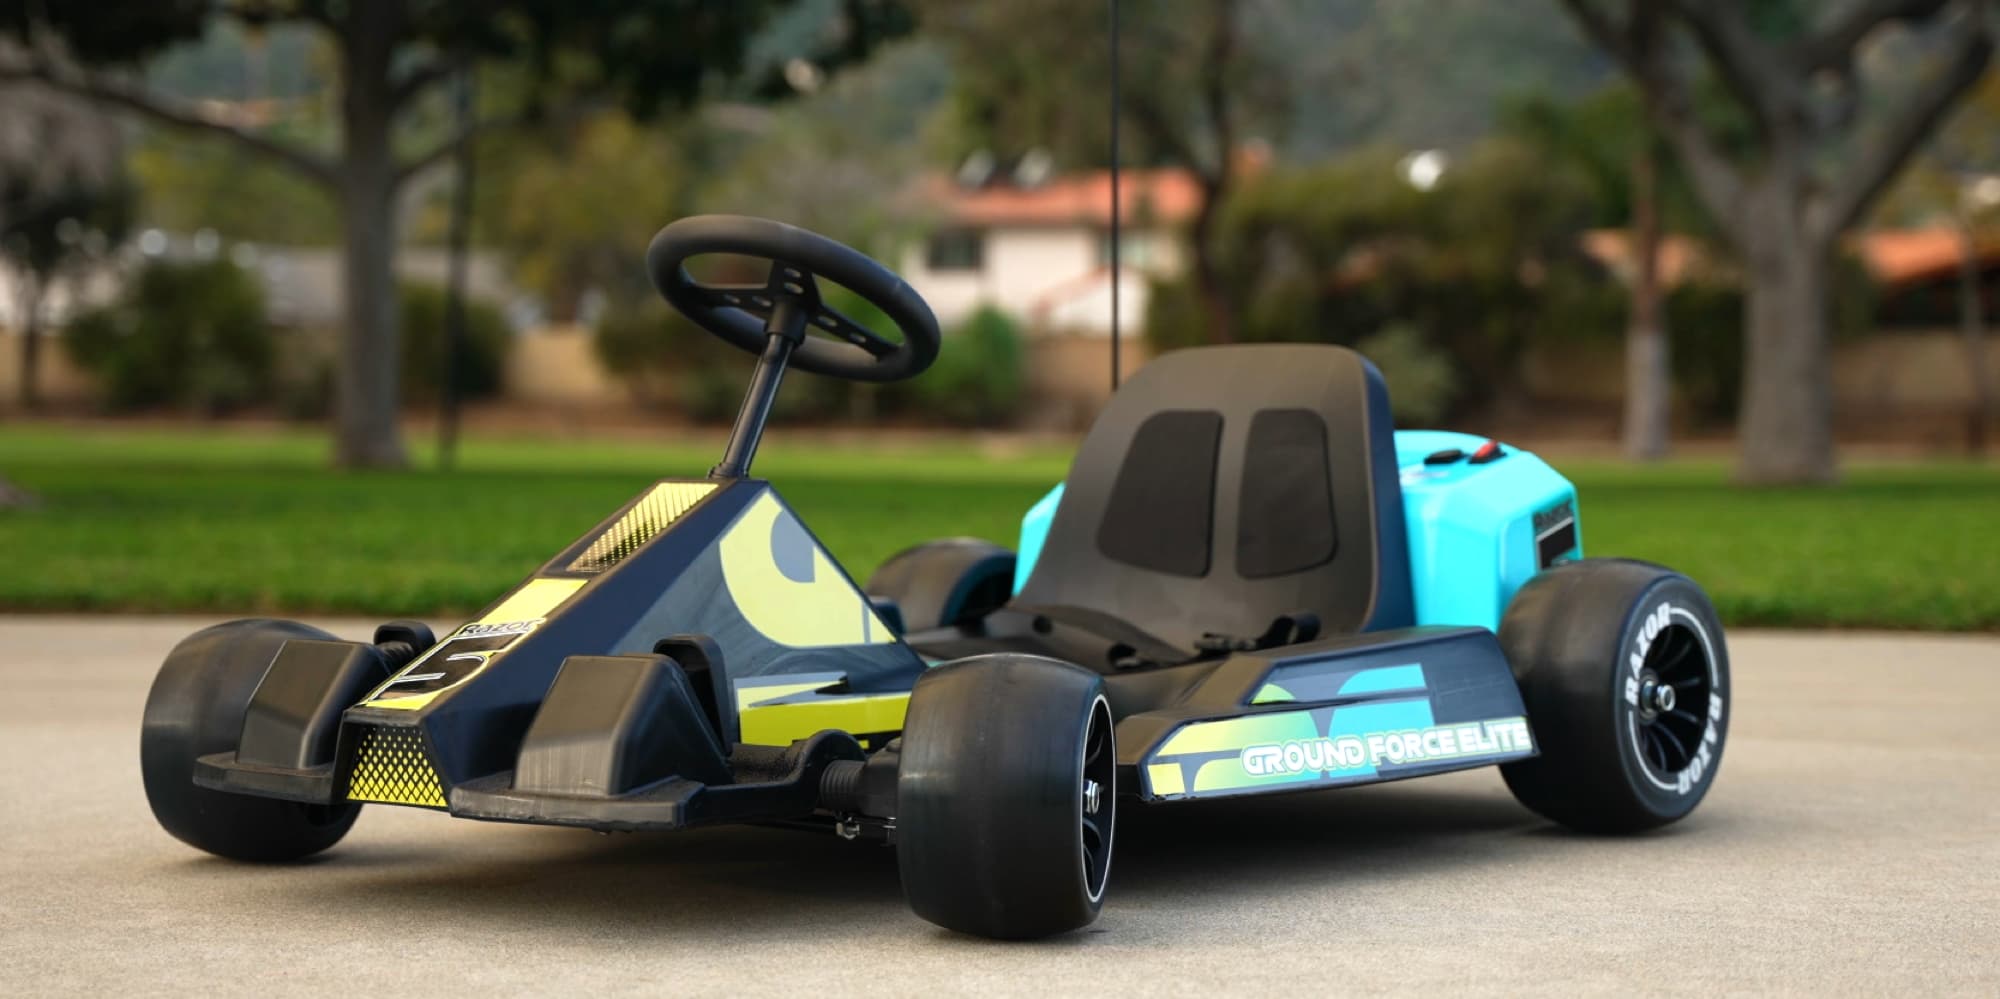 Razor Ground Force Elite electric go-kart is big enough for adults